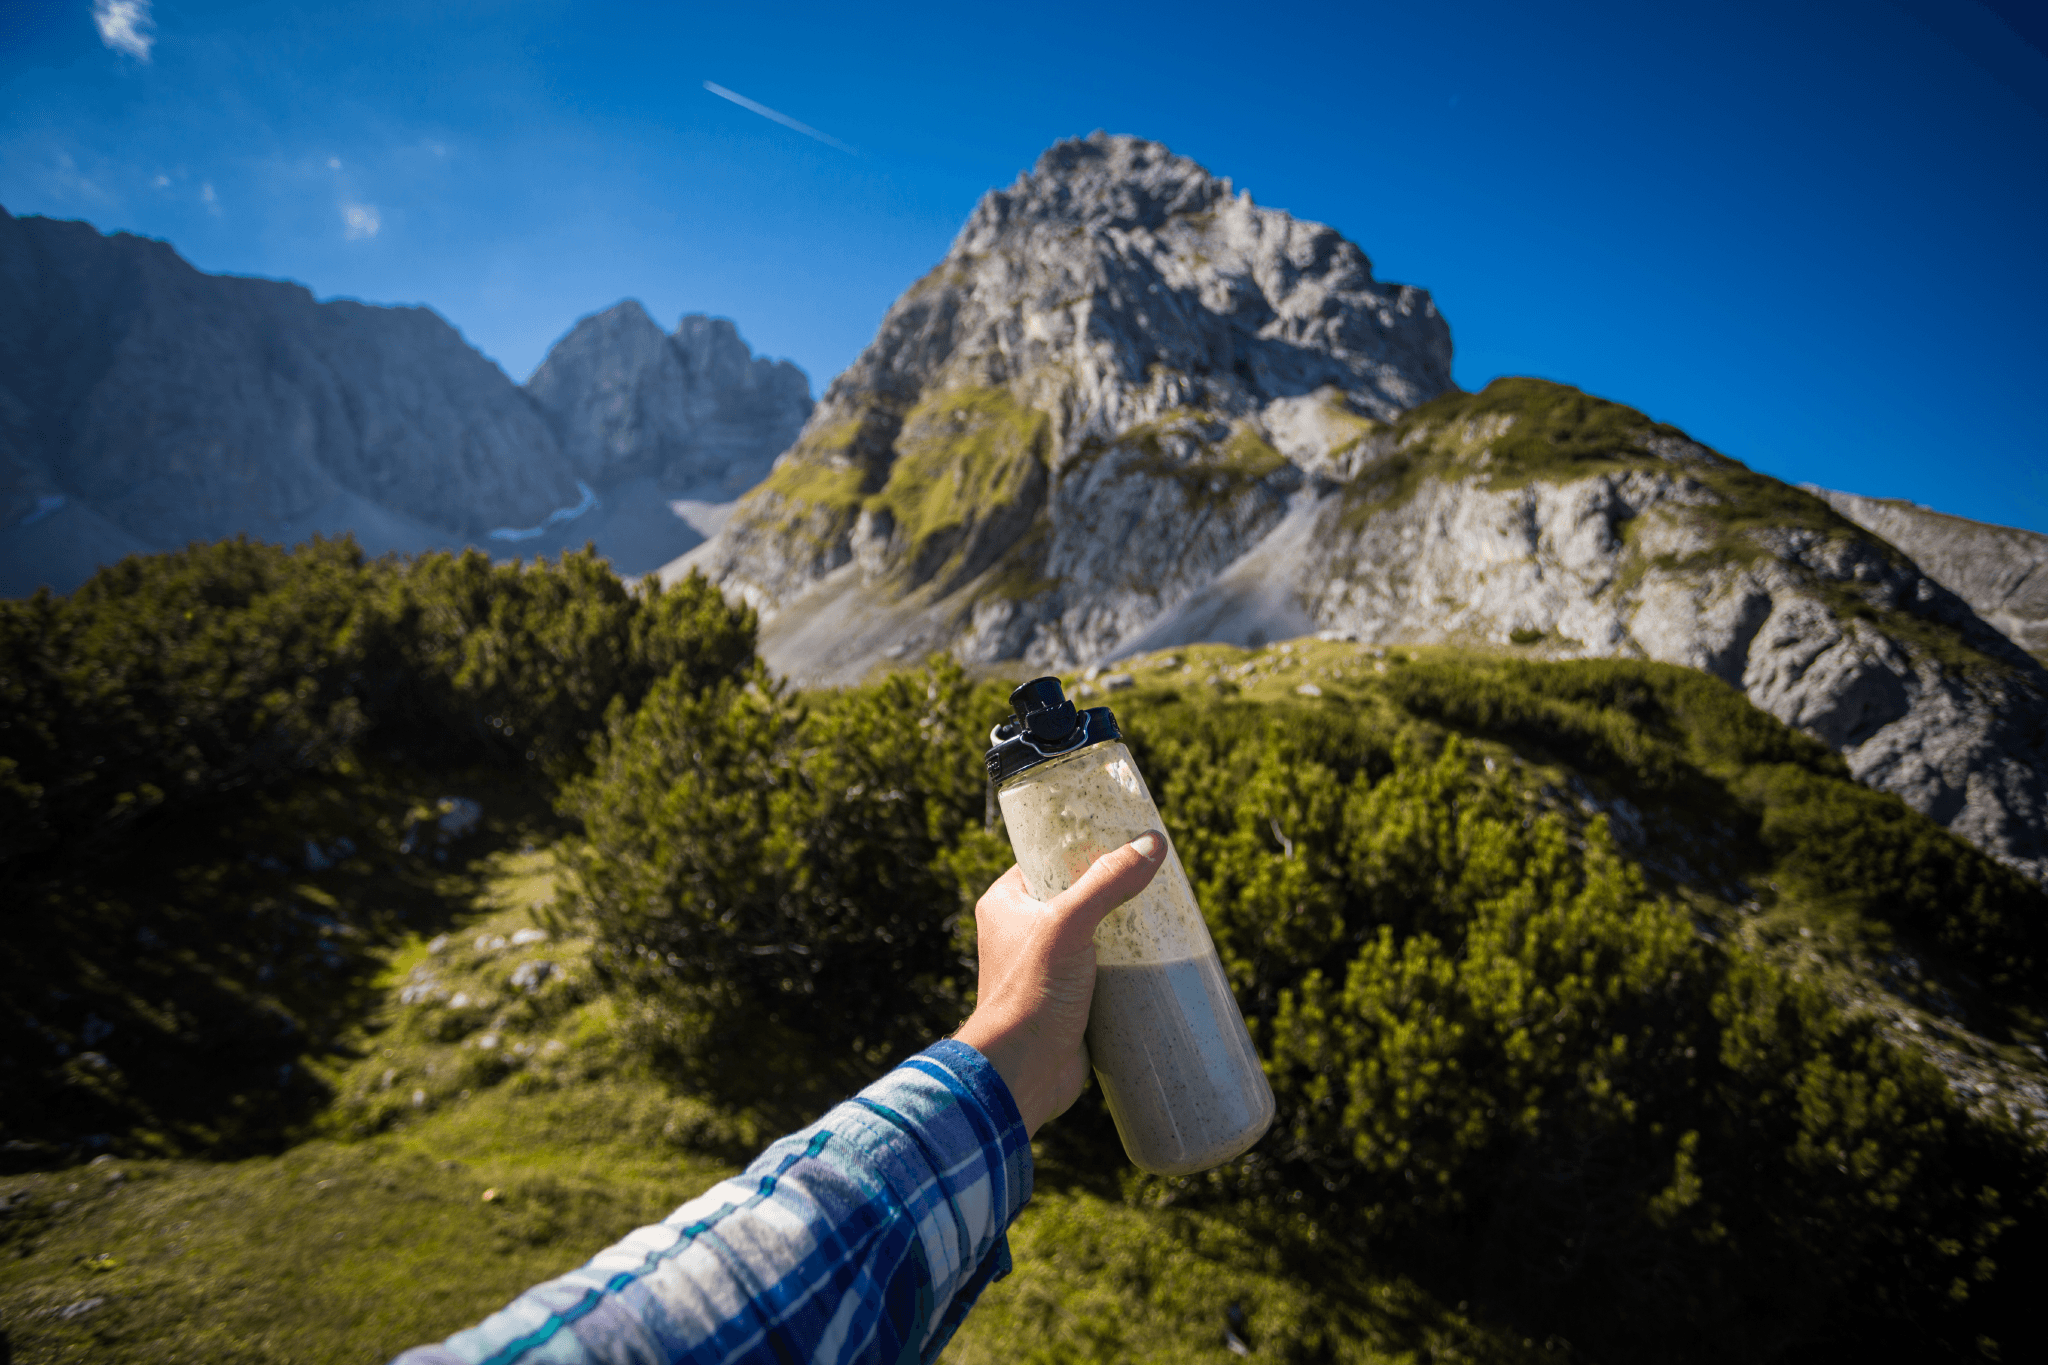 Using Nutberg during a hike. Photo Courtesy Tomas Sedlma